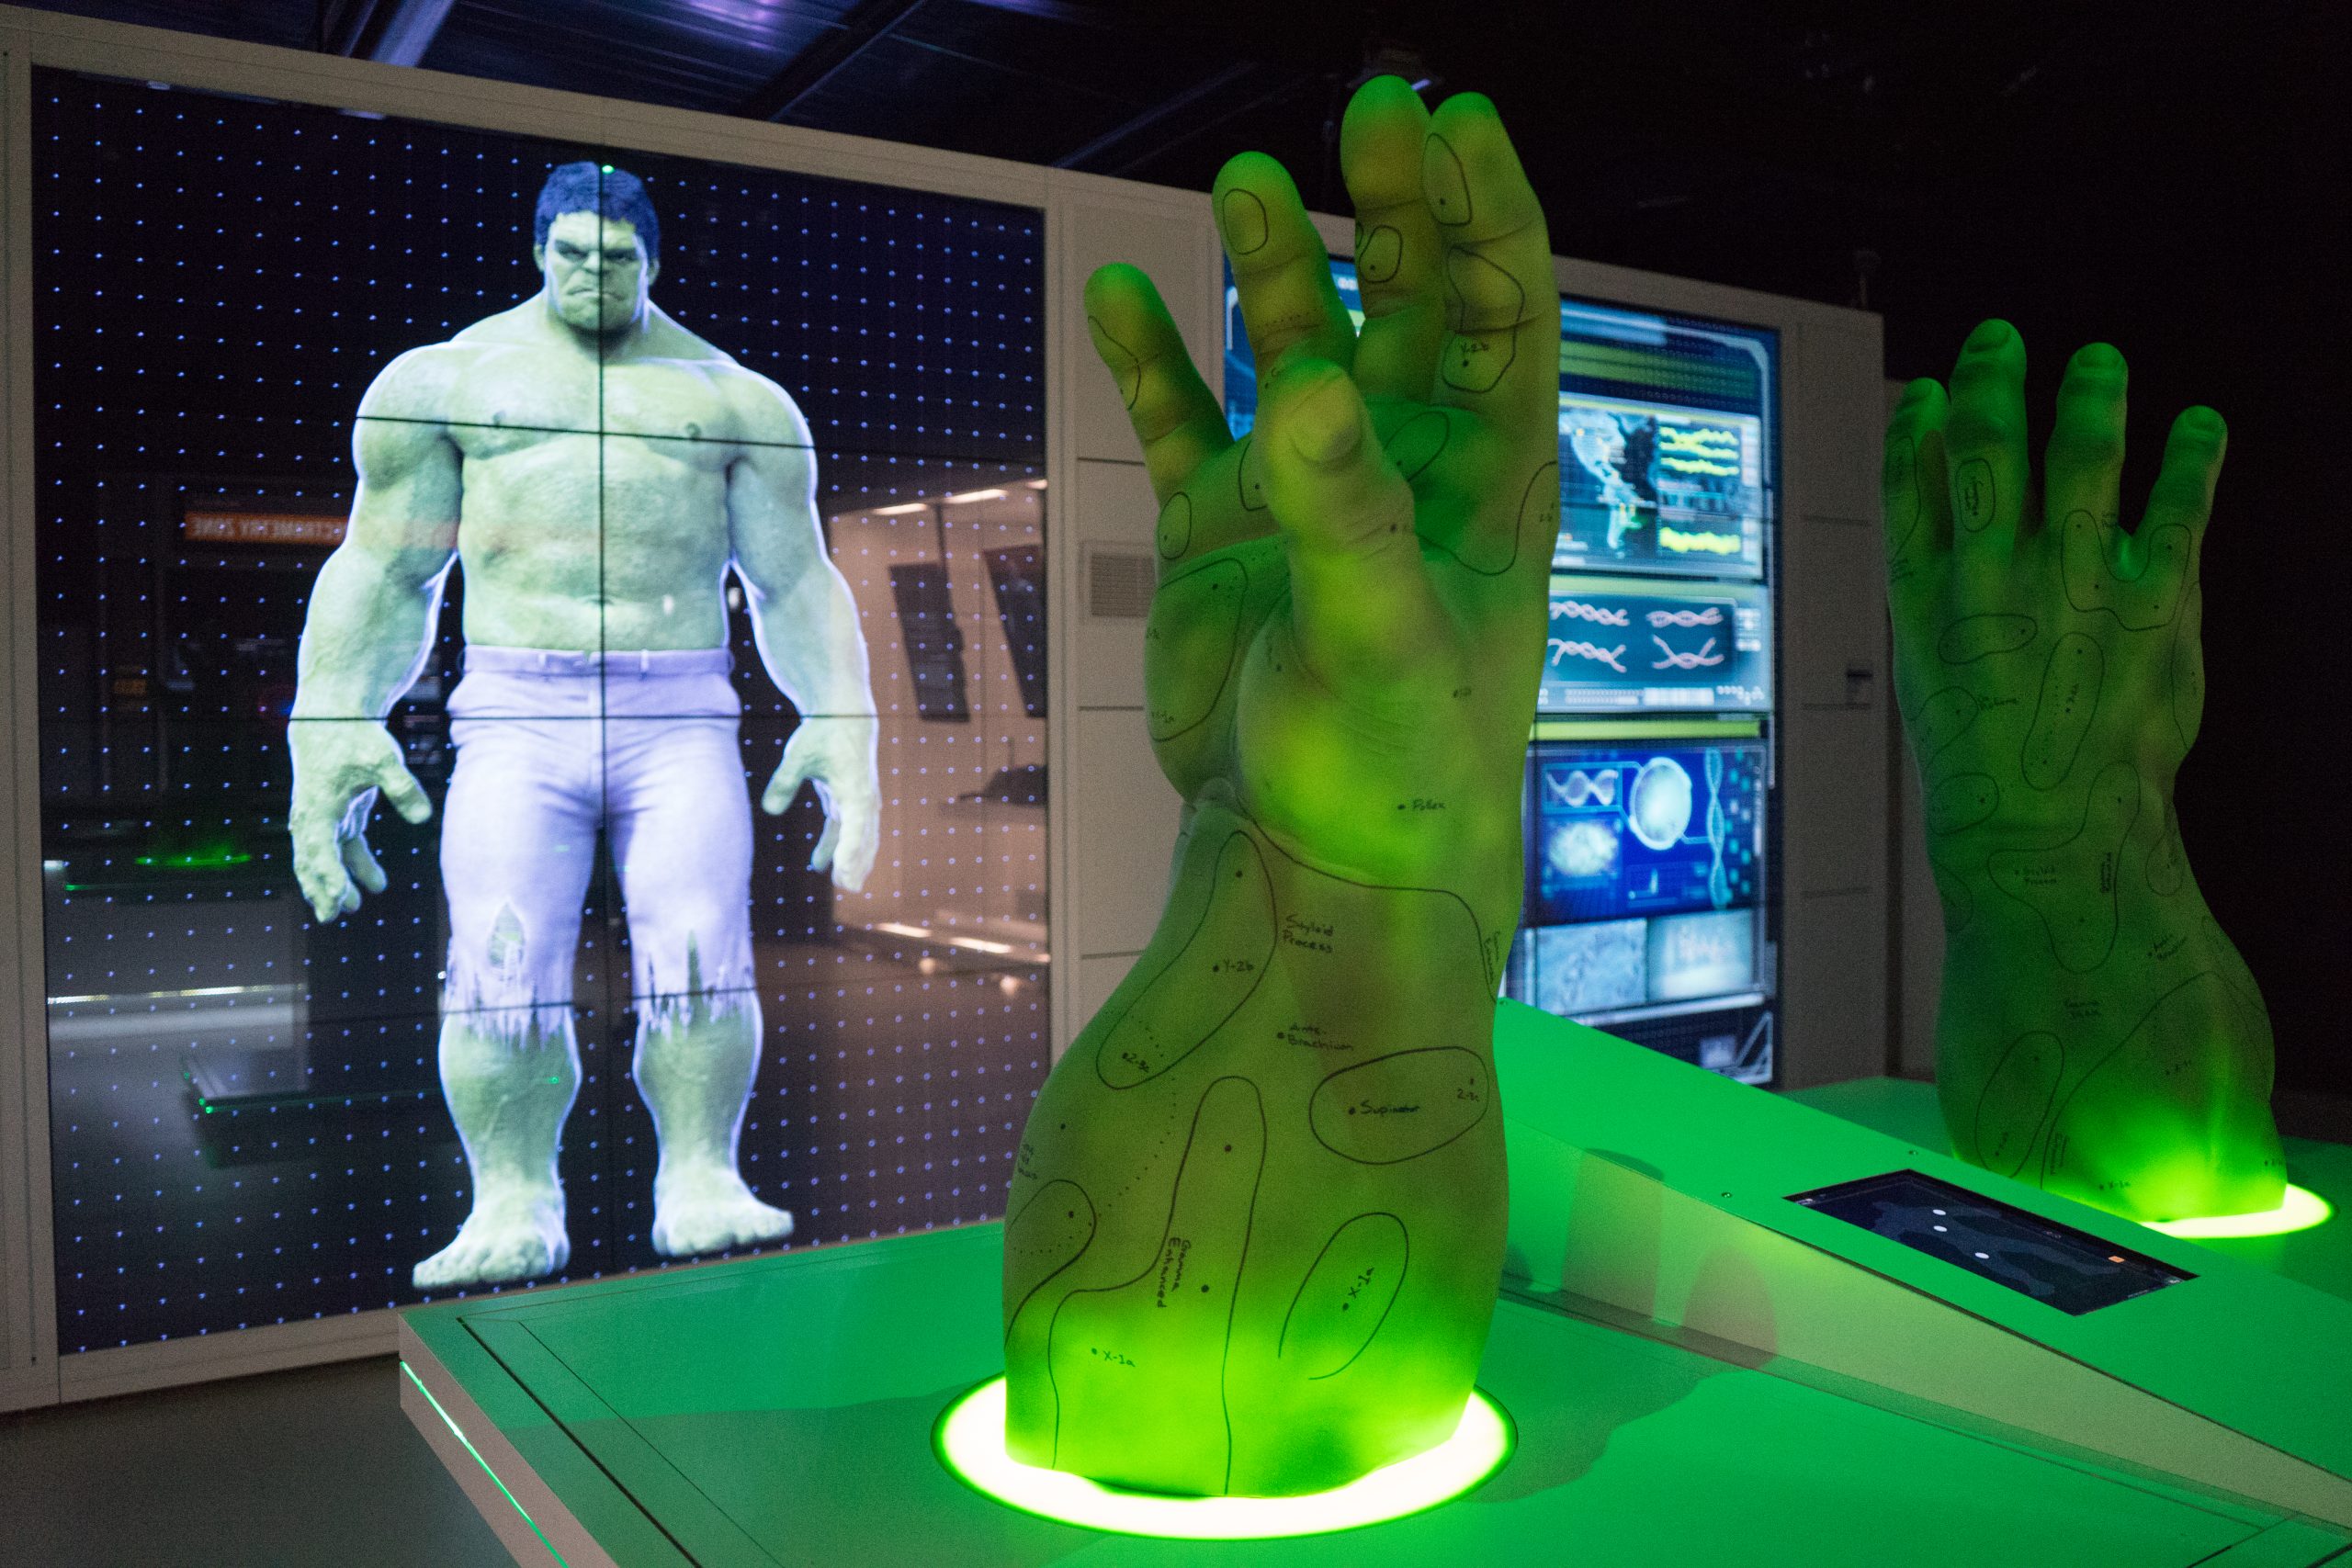 Avengers Operational Equipment On Display At Marvel Avengers S.T.A.T.I.O.N. In Beijing